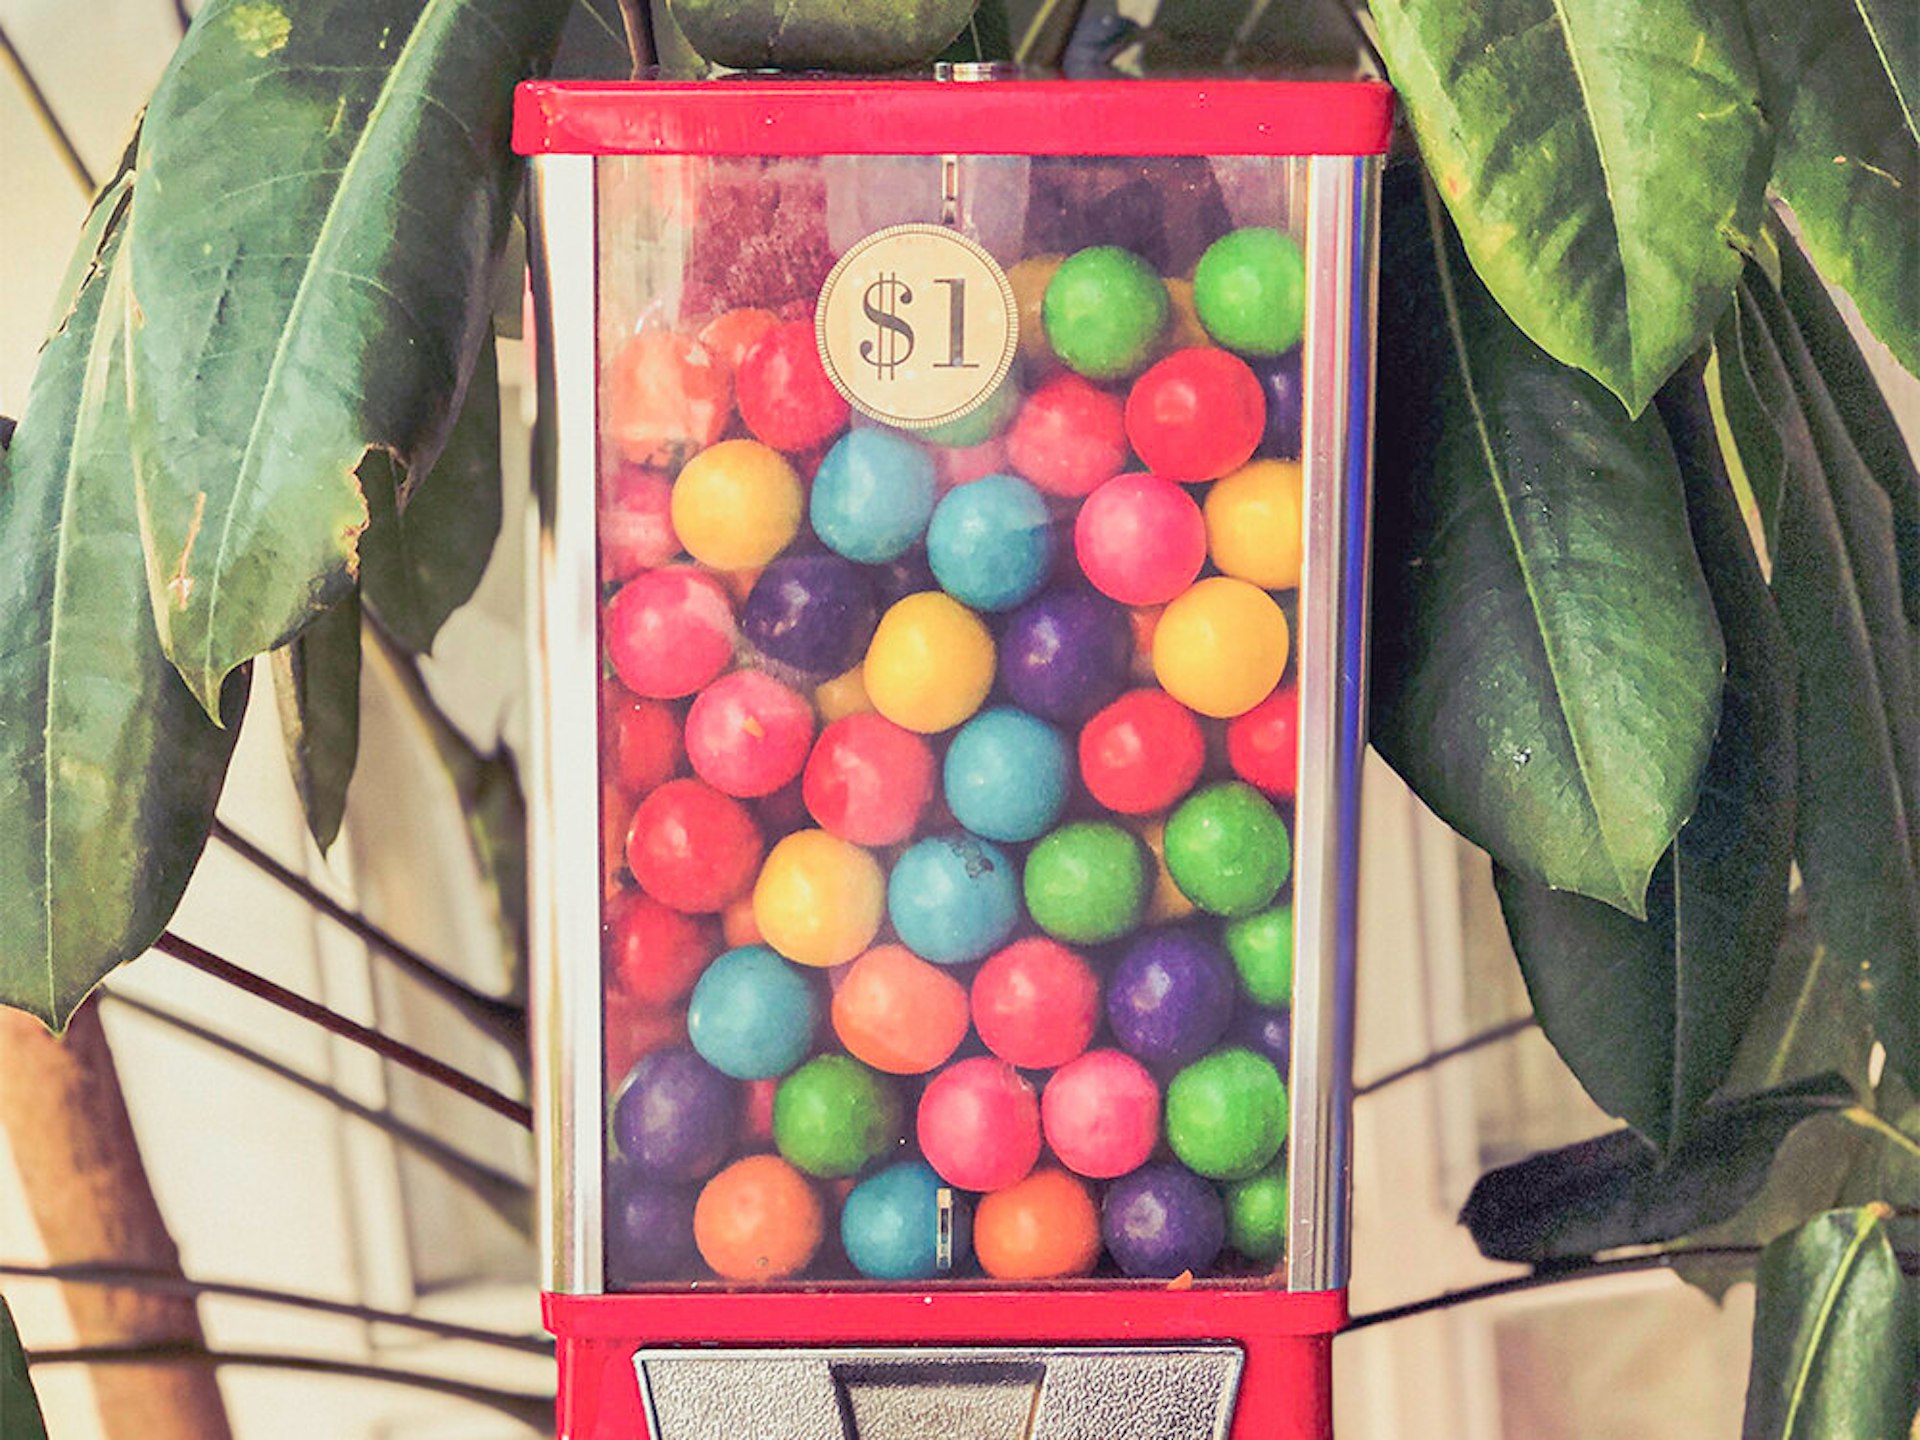 A red gum-ball machine with multi-coloured gum balls in it.